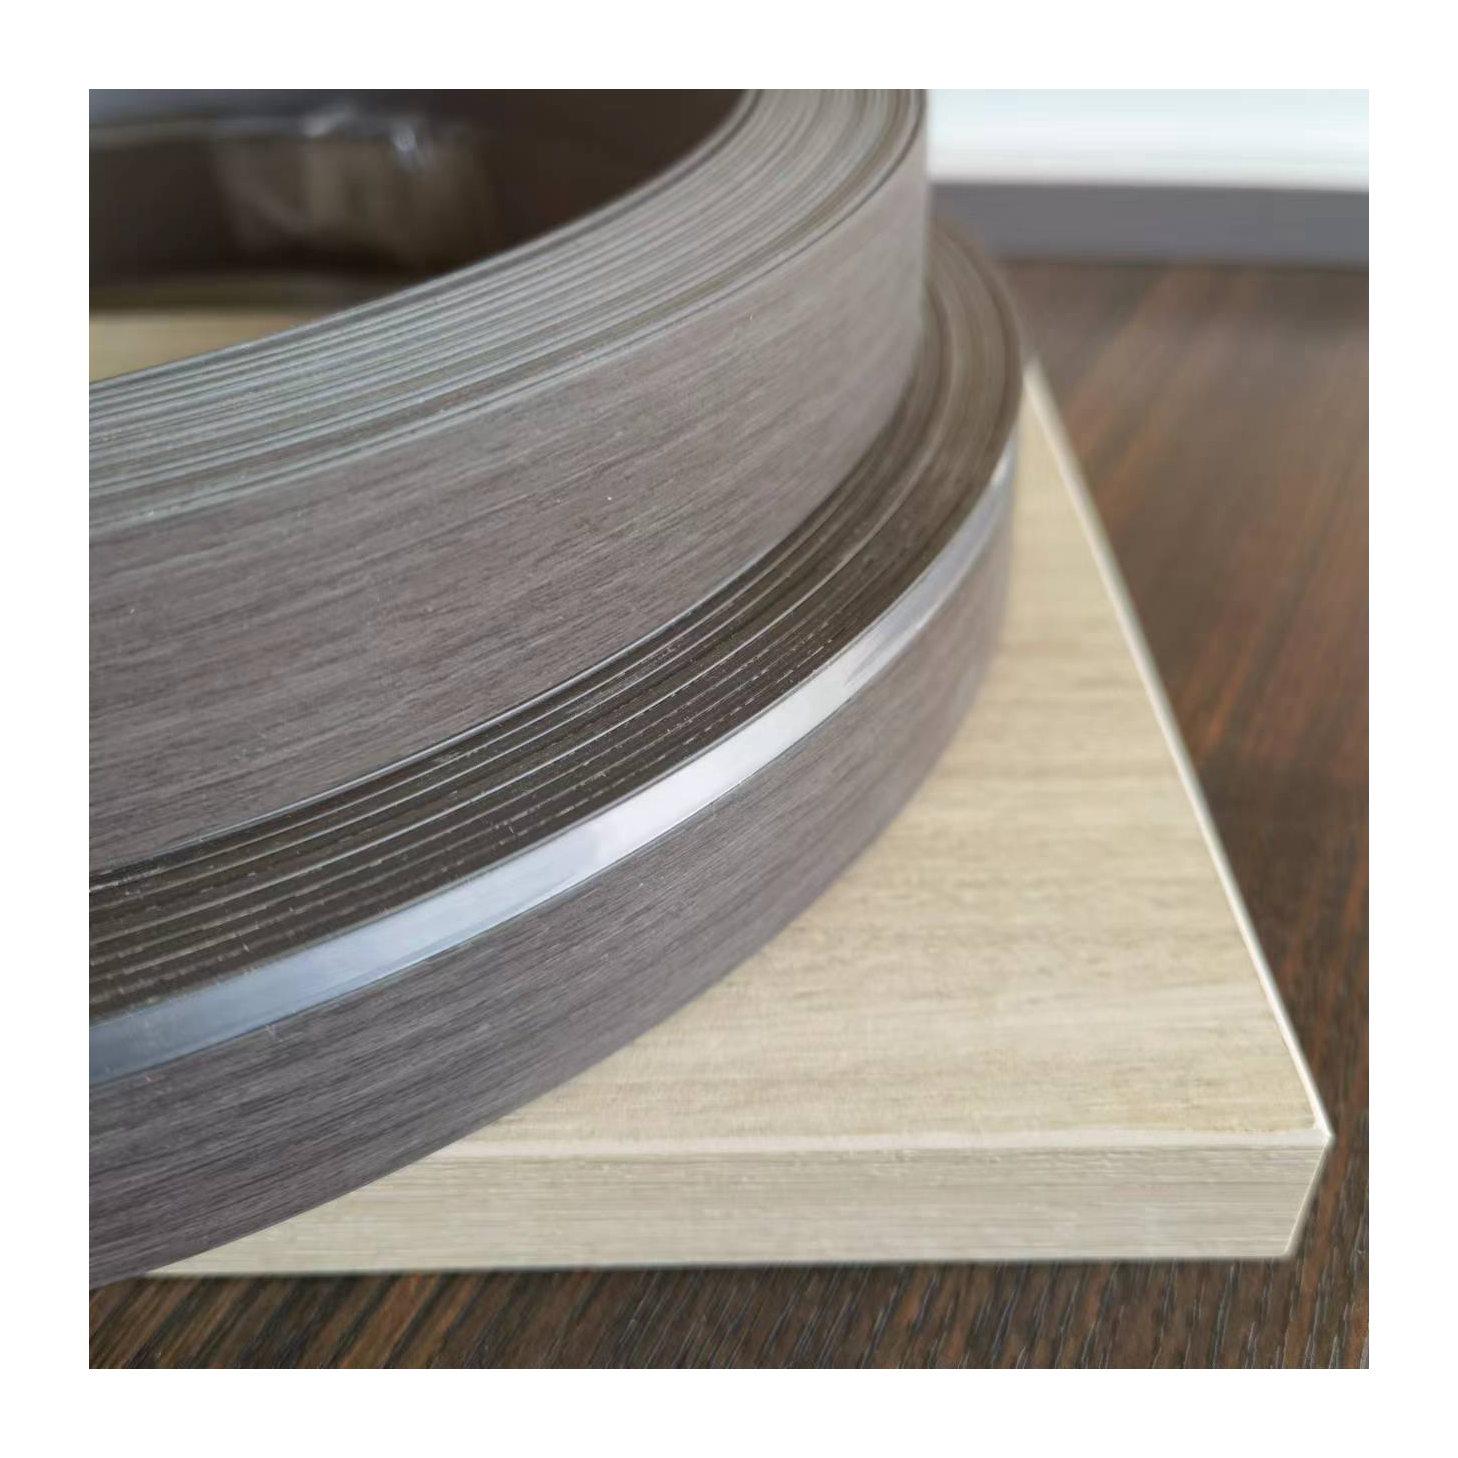 1mm 2mm ABS Acrylic Edge Banding Edge Strips For Furniture Accessories